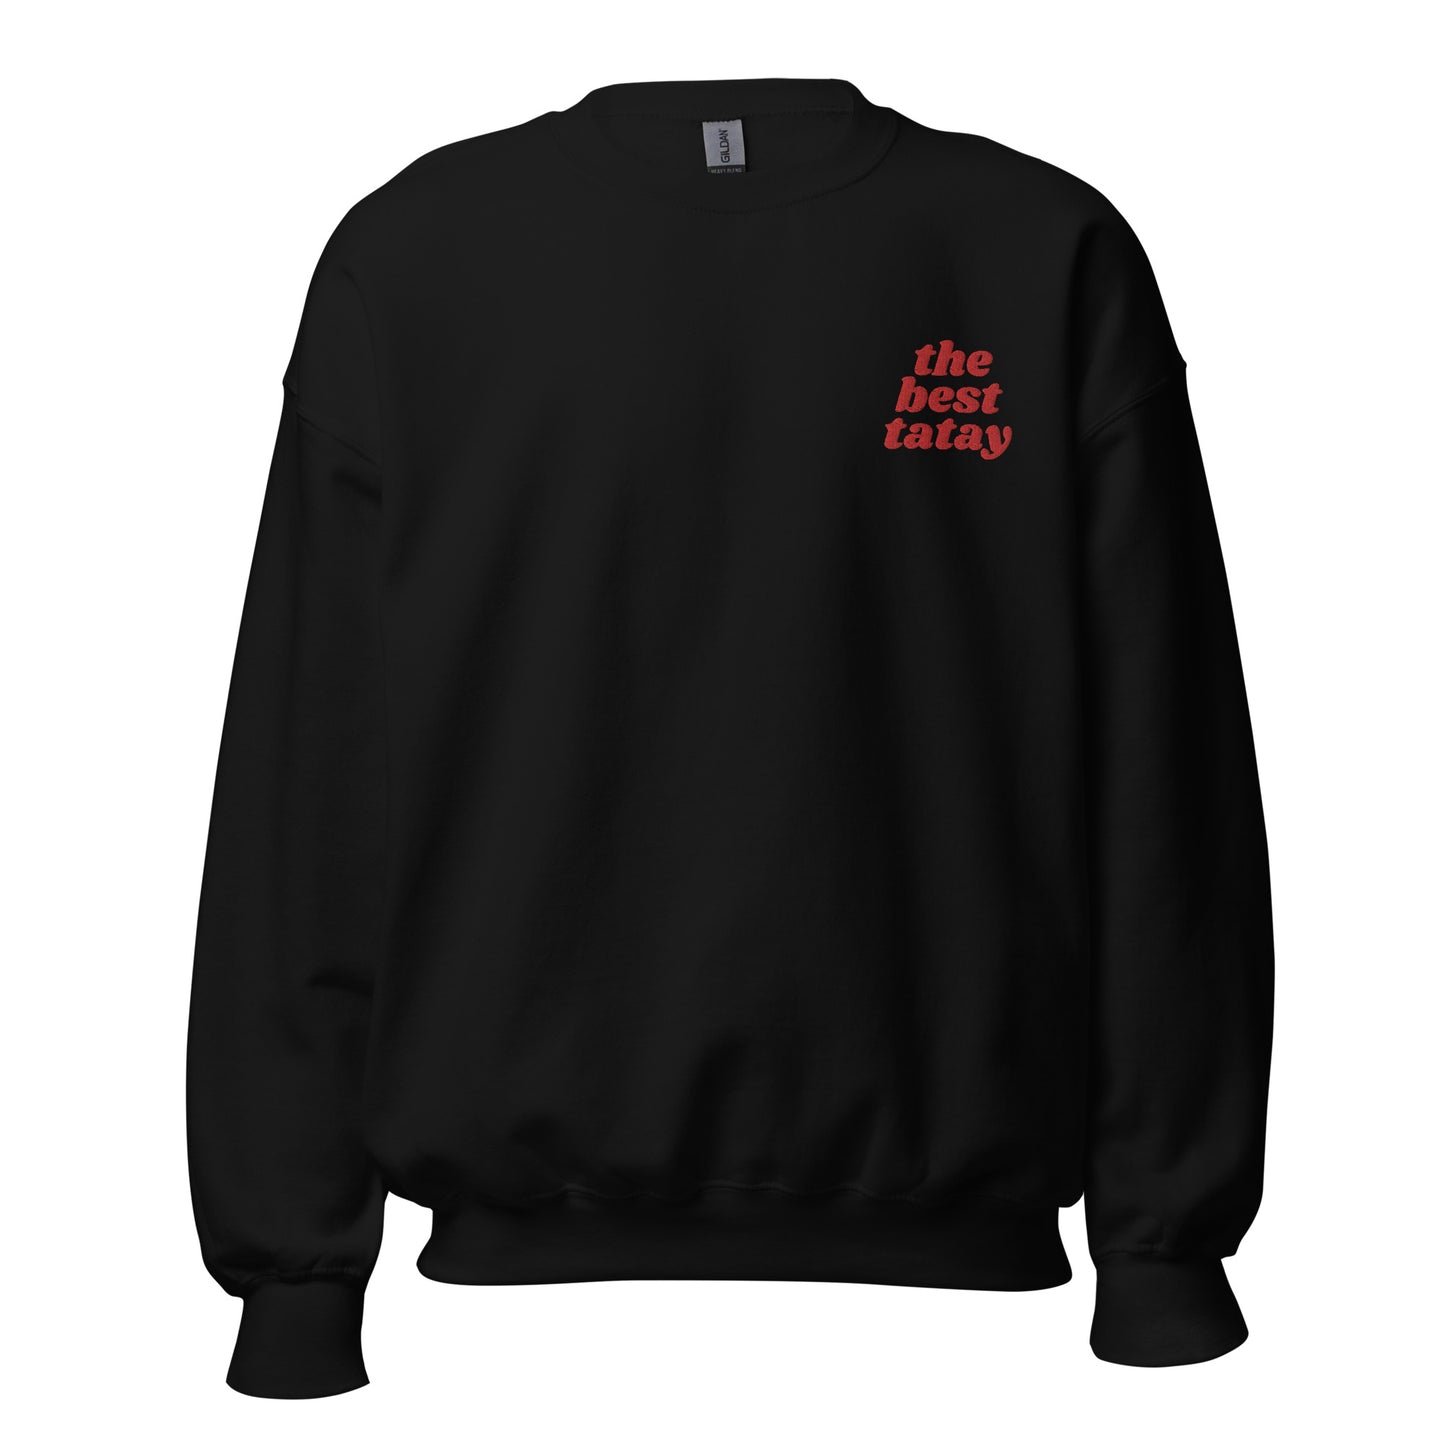 Filipino Sweatshirt Crew Neck The Best Tatay Super Dad Embroidered Father's Day Gift in color variant Black